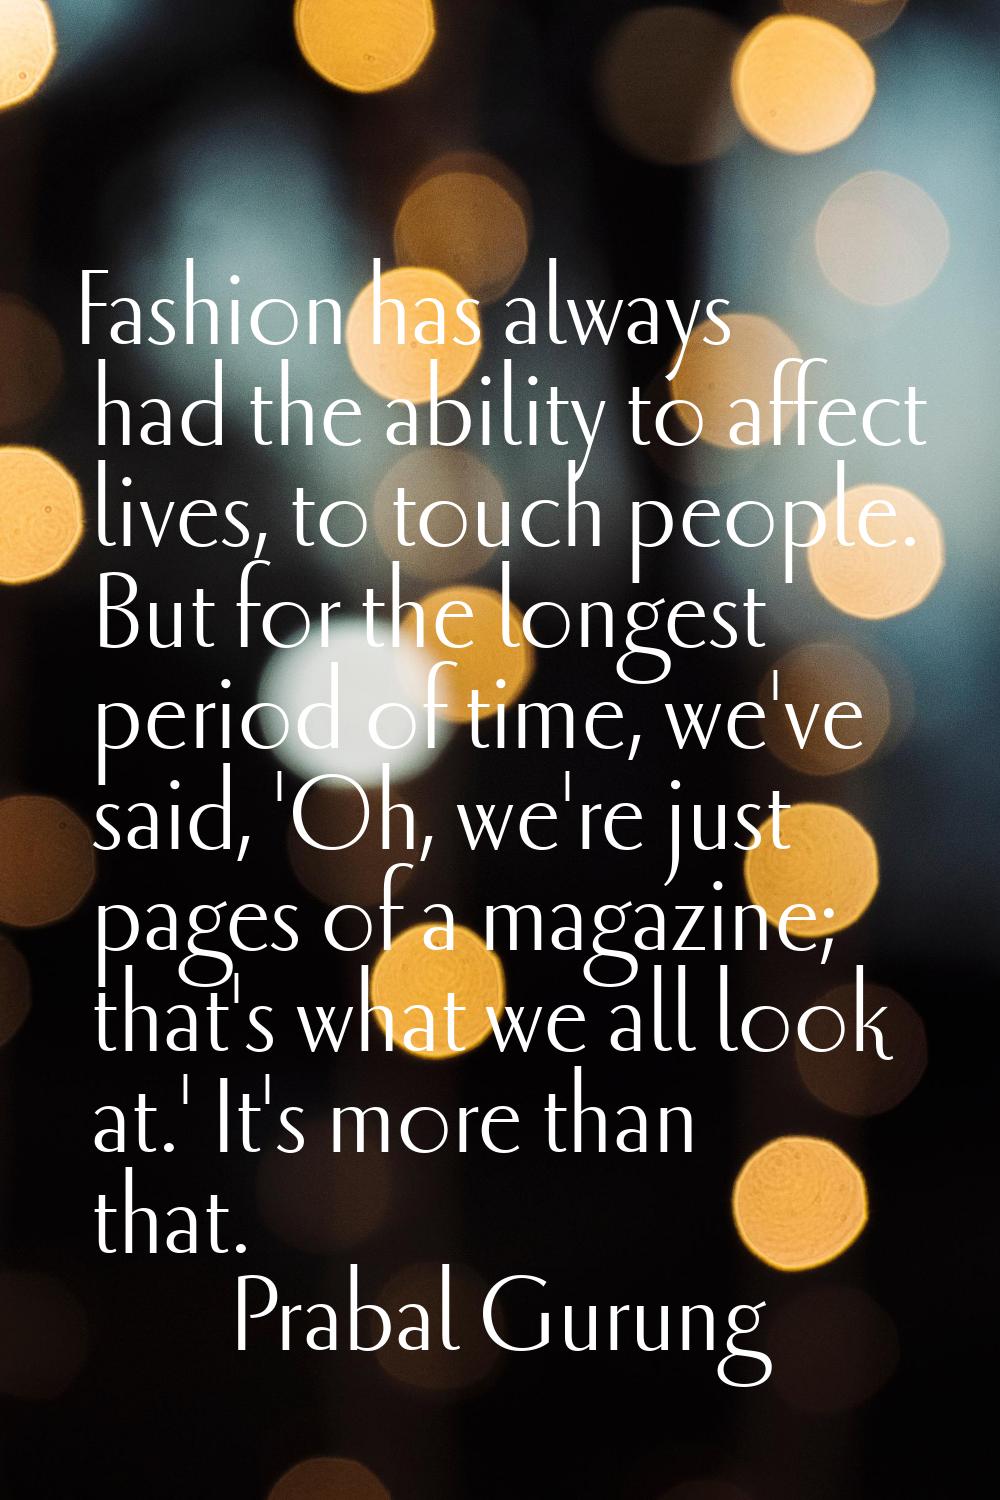 Fashion has always had the ability to affect lives, to touch people. But for the longest period of 